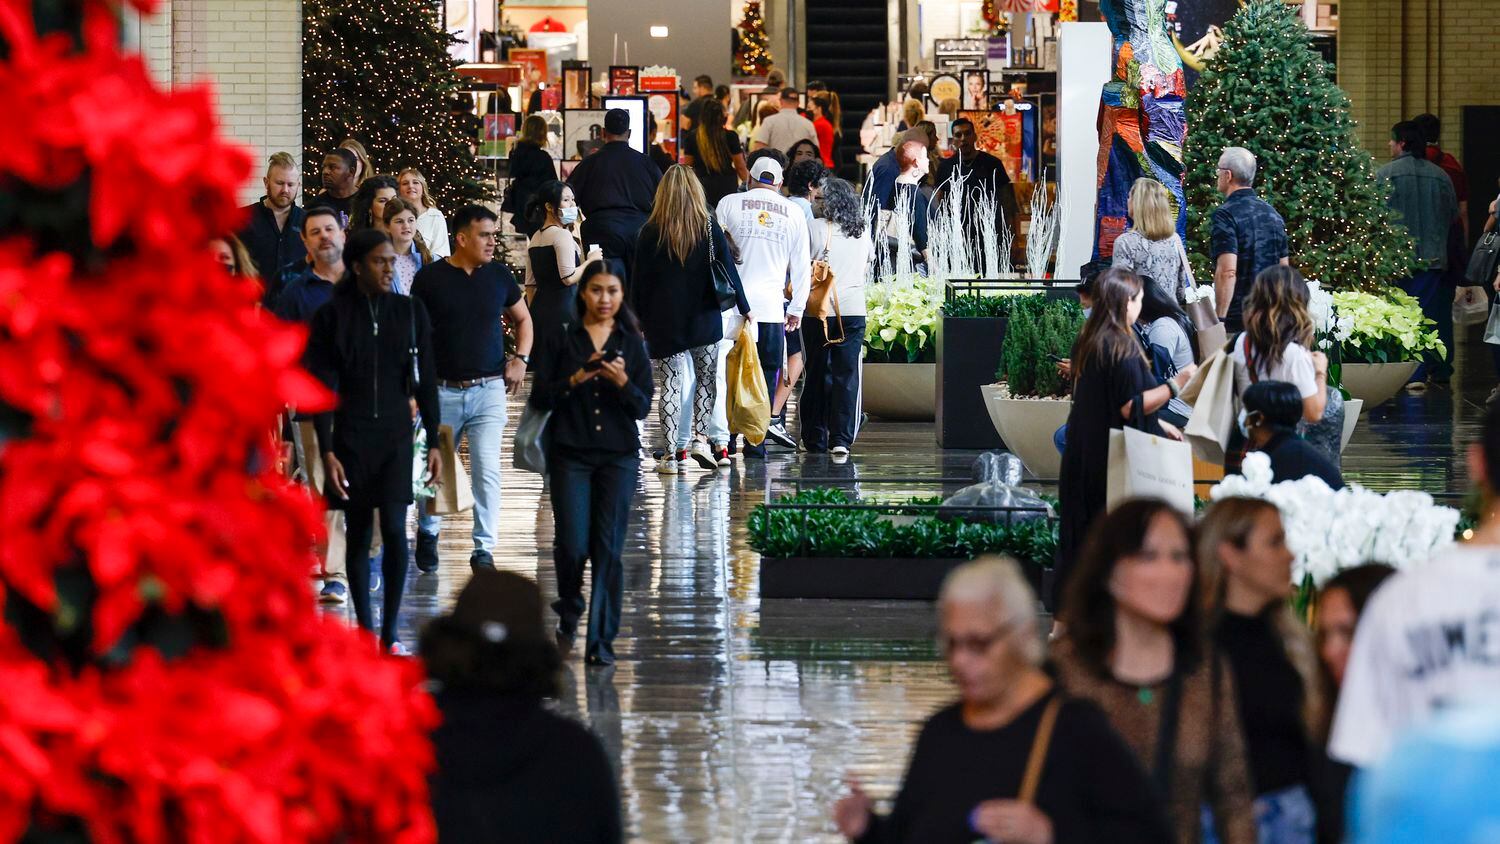 Malls like NorthPark Center become necessary destinations during the holiday season. It's...